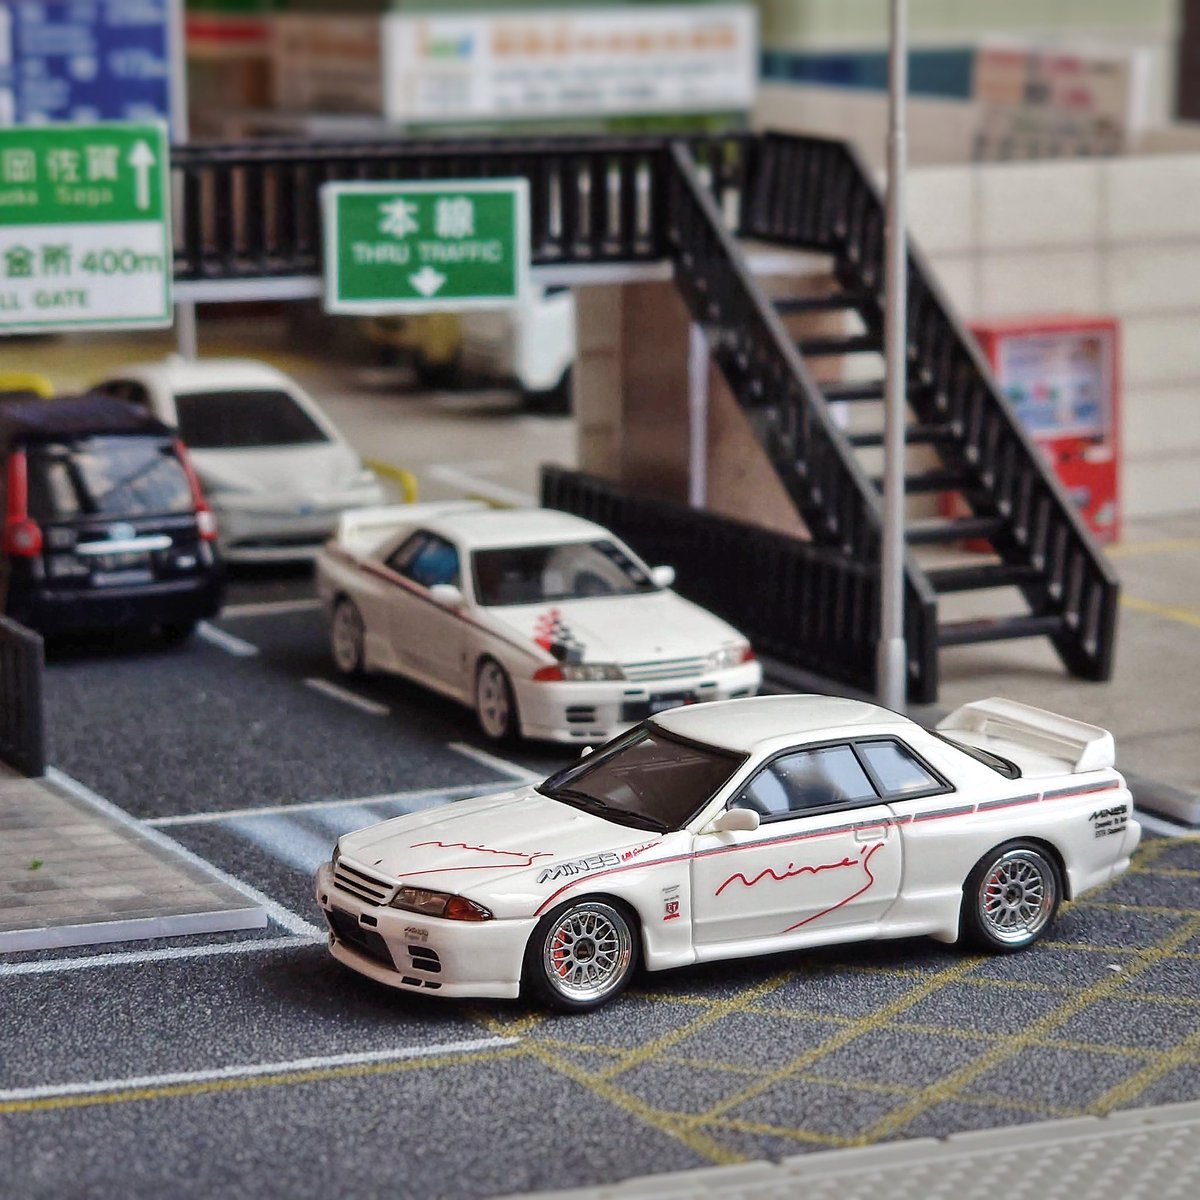 Mine’s and Nismo r32 GT-R! 📸 #ignitionmodel #tomica #resinmodel #diecast #164scale #diorama #xperia5iv 

マインズとニスモr32GT-R！📸 #点火モデル #トミカ #ミニカー #ジオラマ